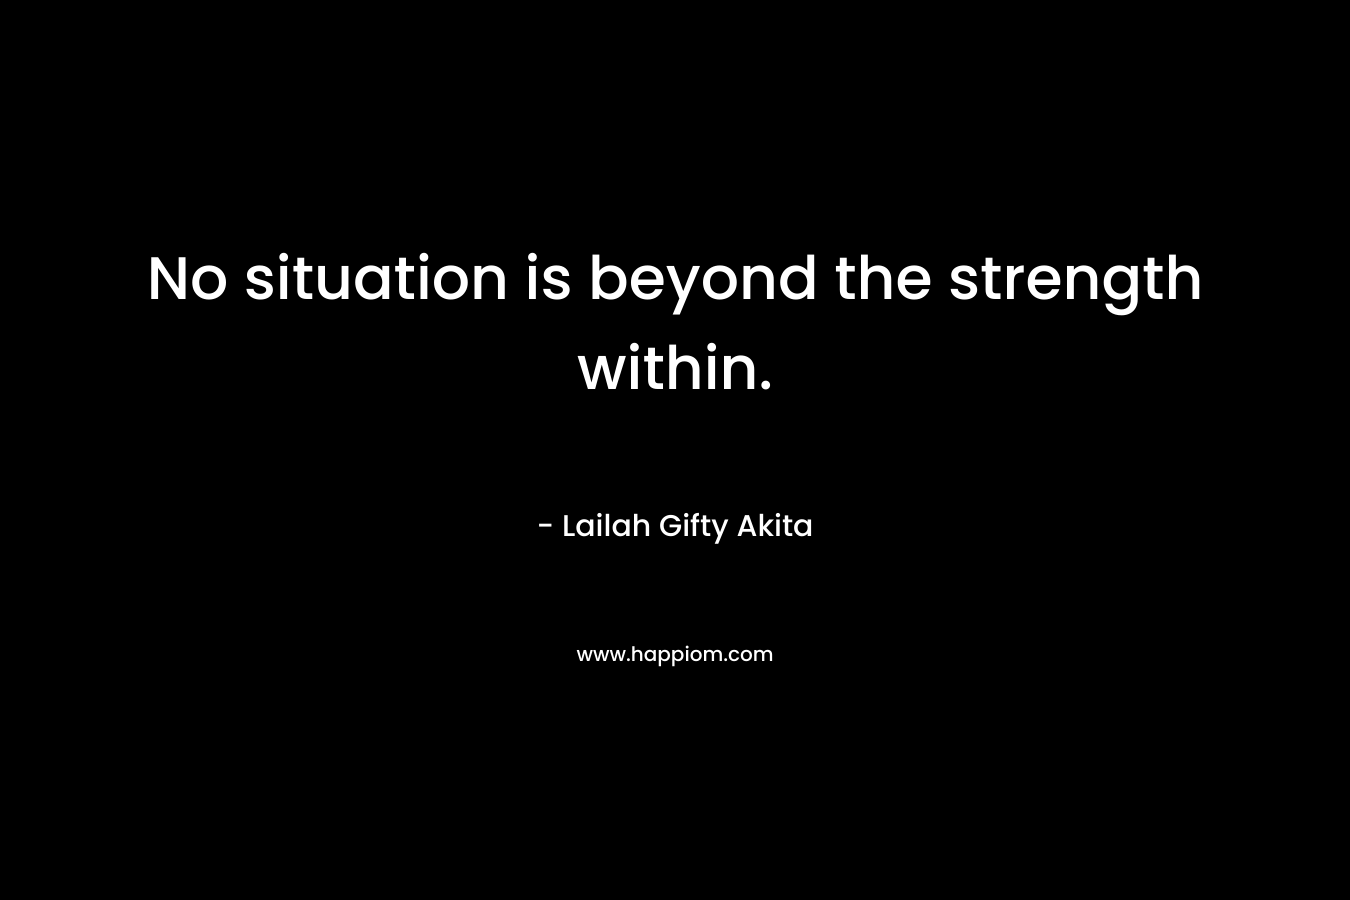 No situation is beyond the strength within.